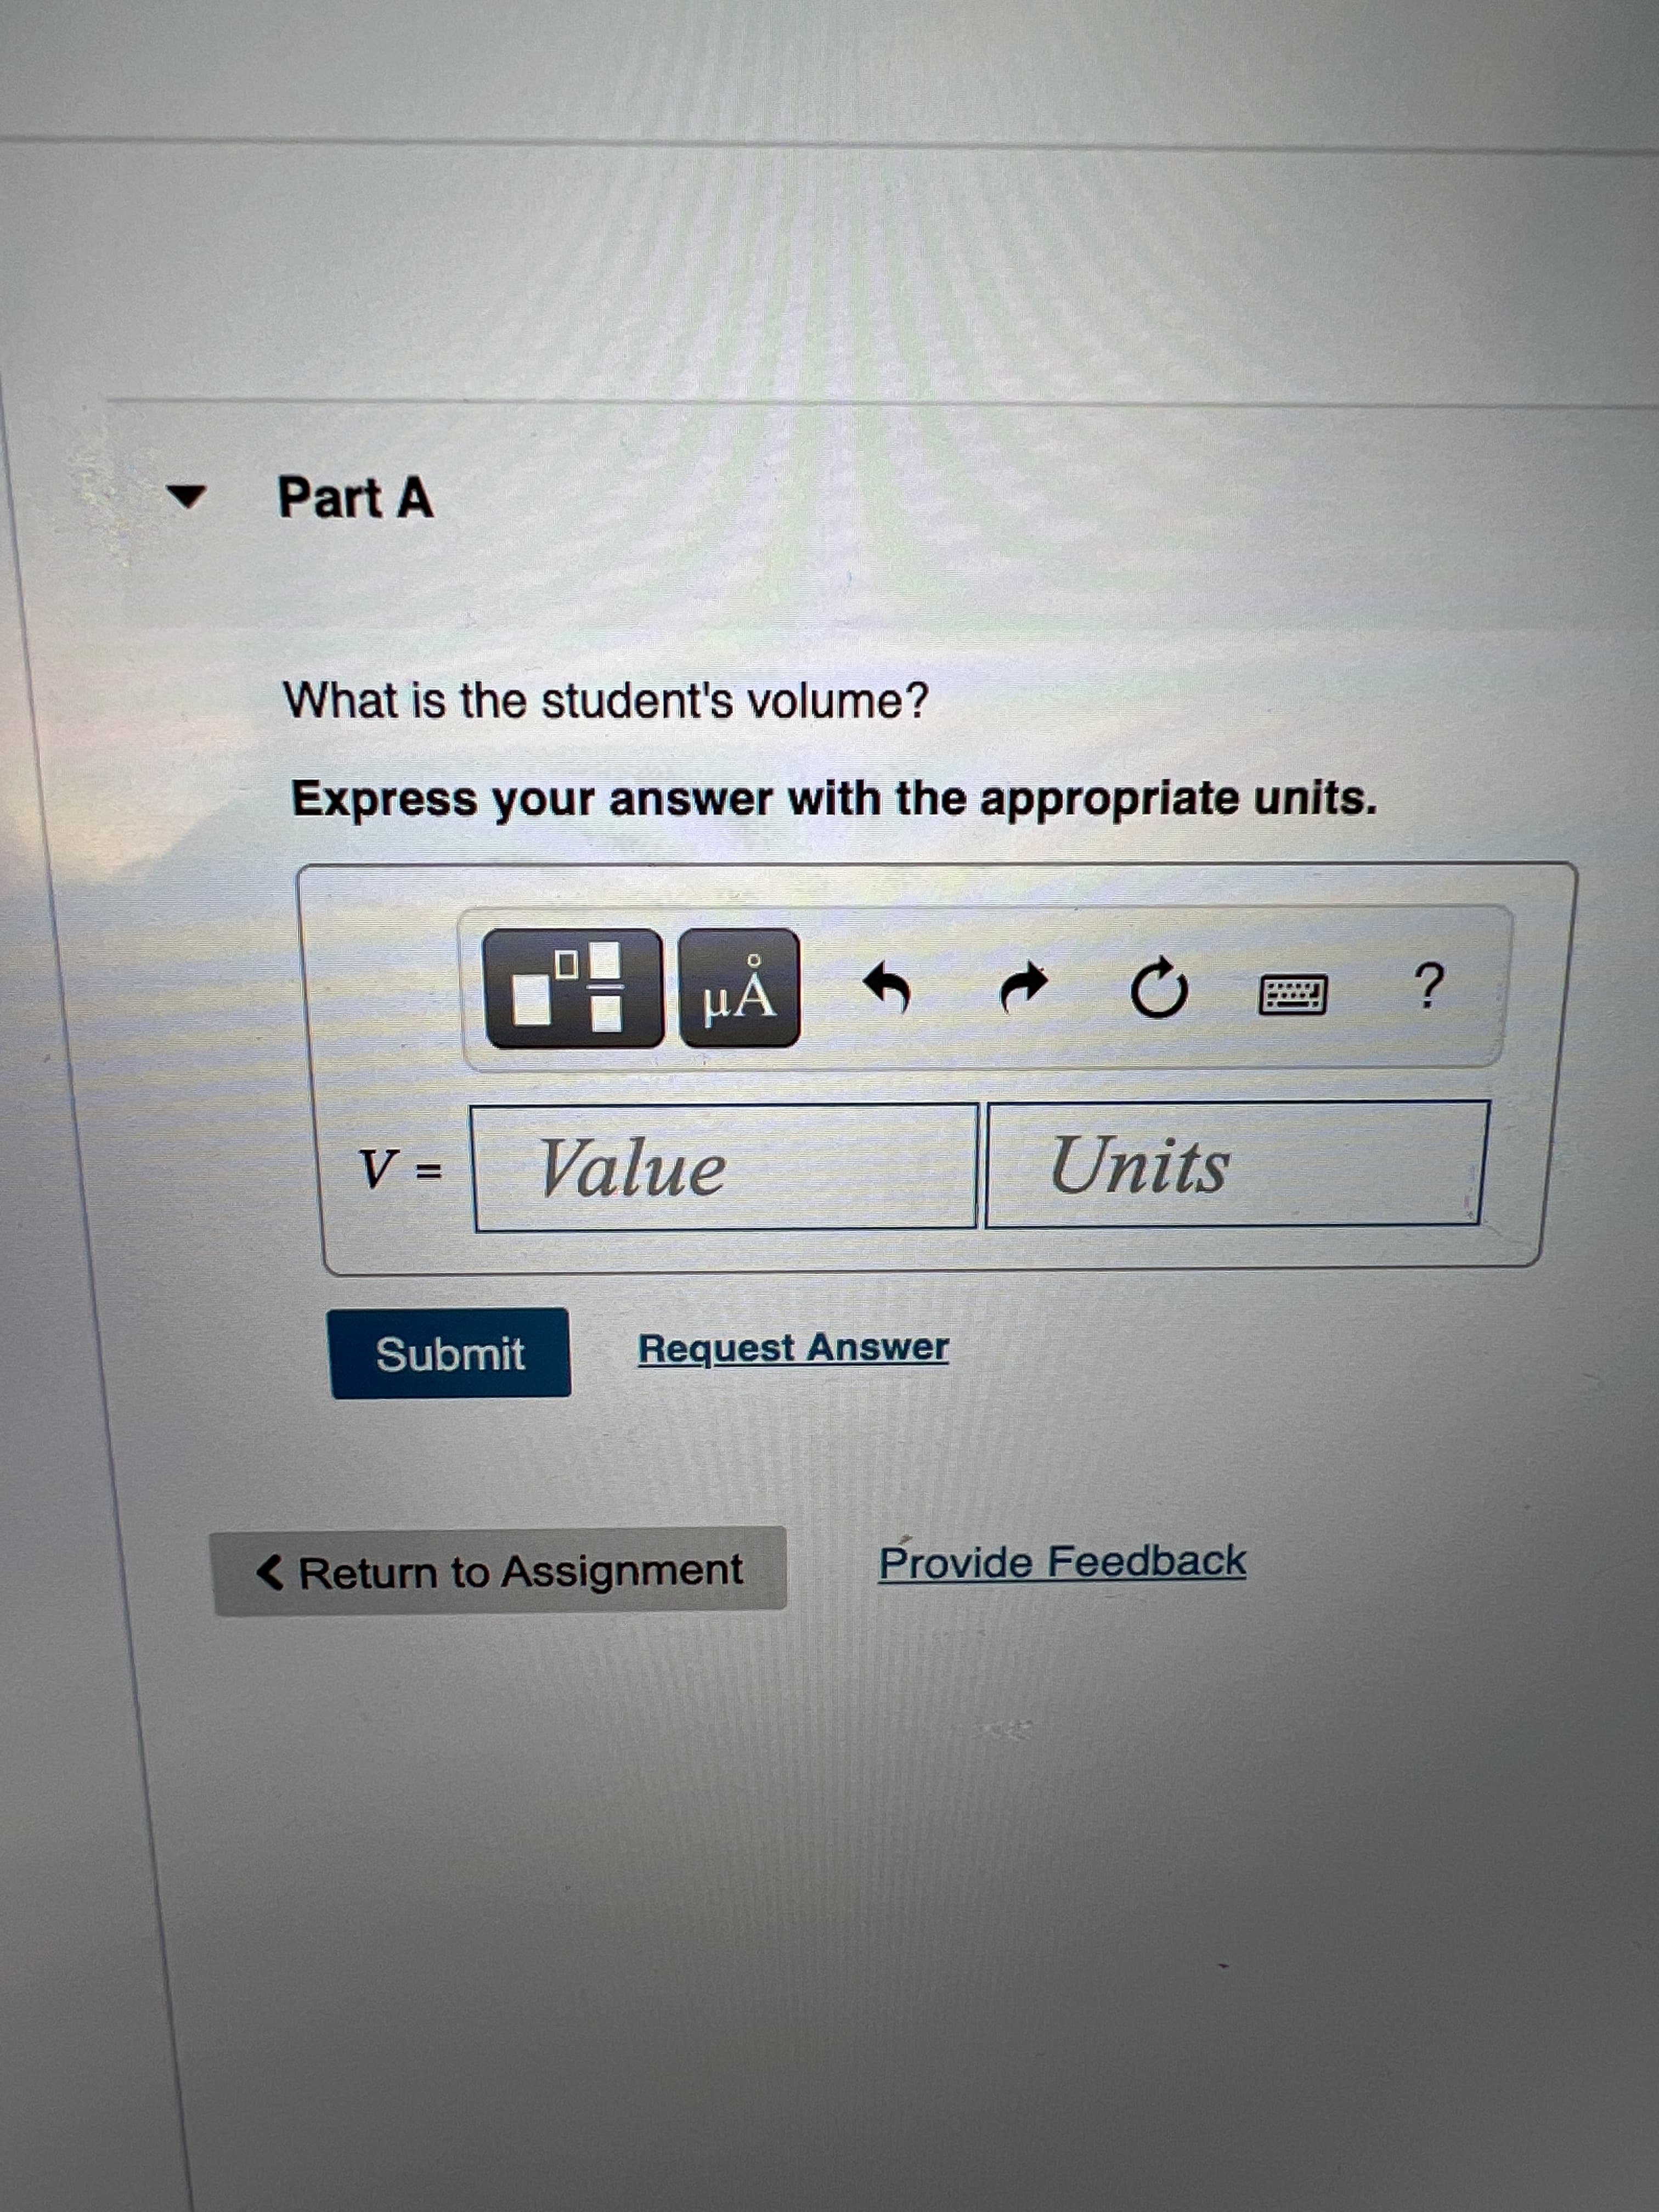 Part A
What is the student's volume?
Express your answer with the appropriate units.
HÁ
Value
3D
Units
Submit
Request Answer
<Return to Assignment
Provide Feedback
